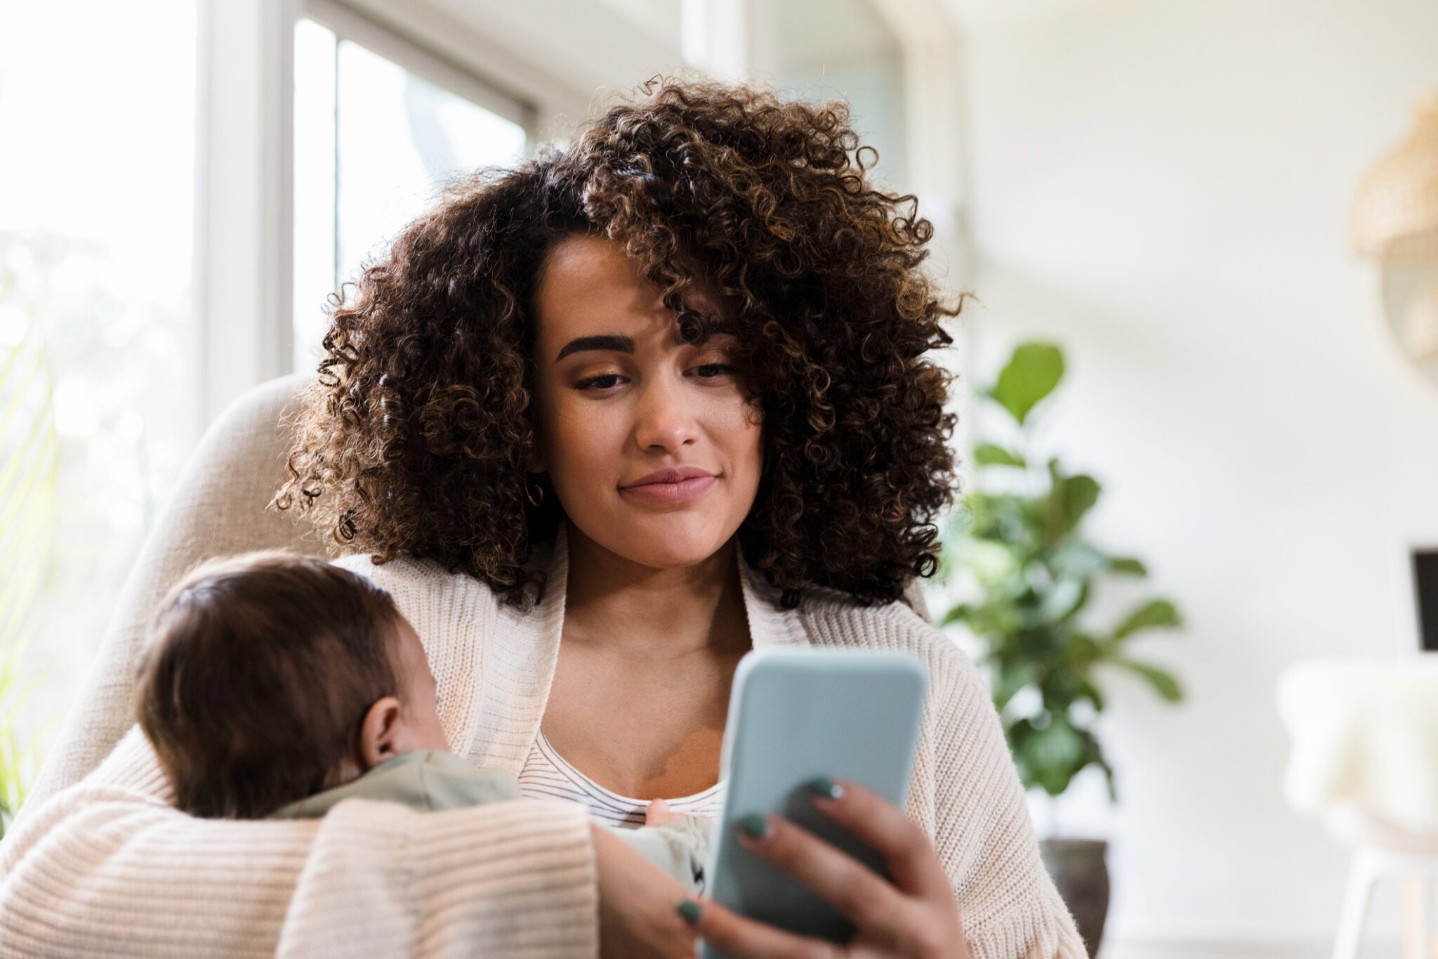 New mom uses smartphone at home